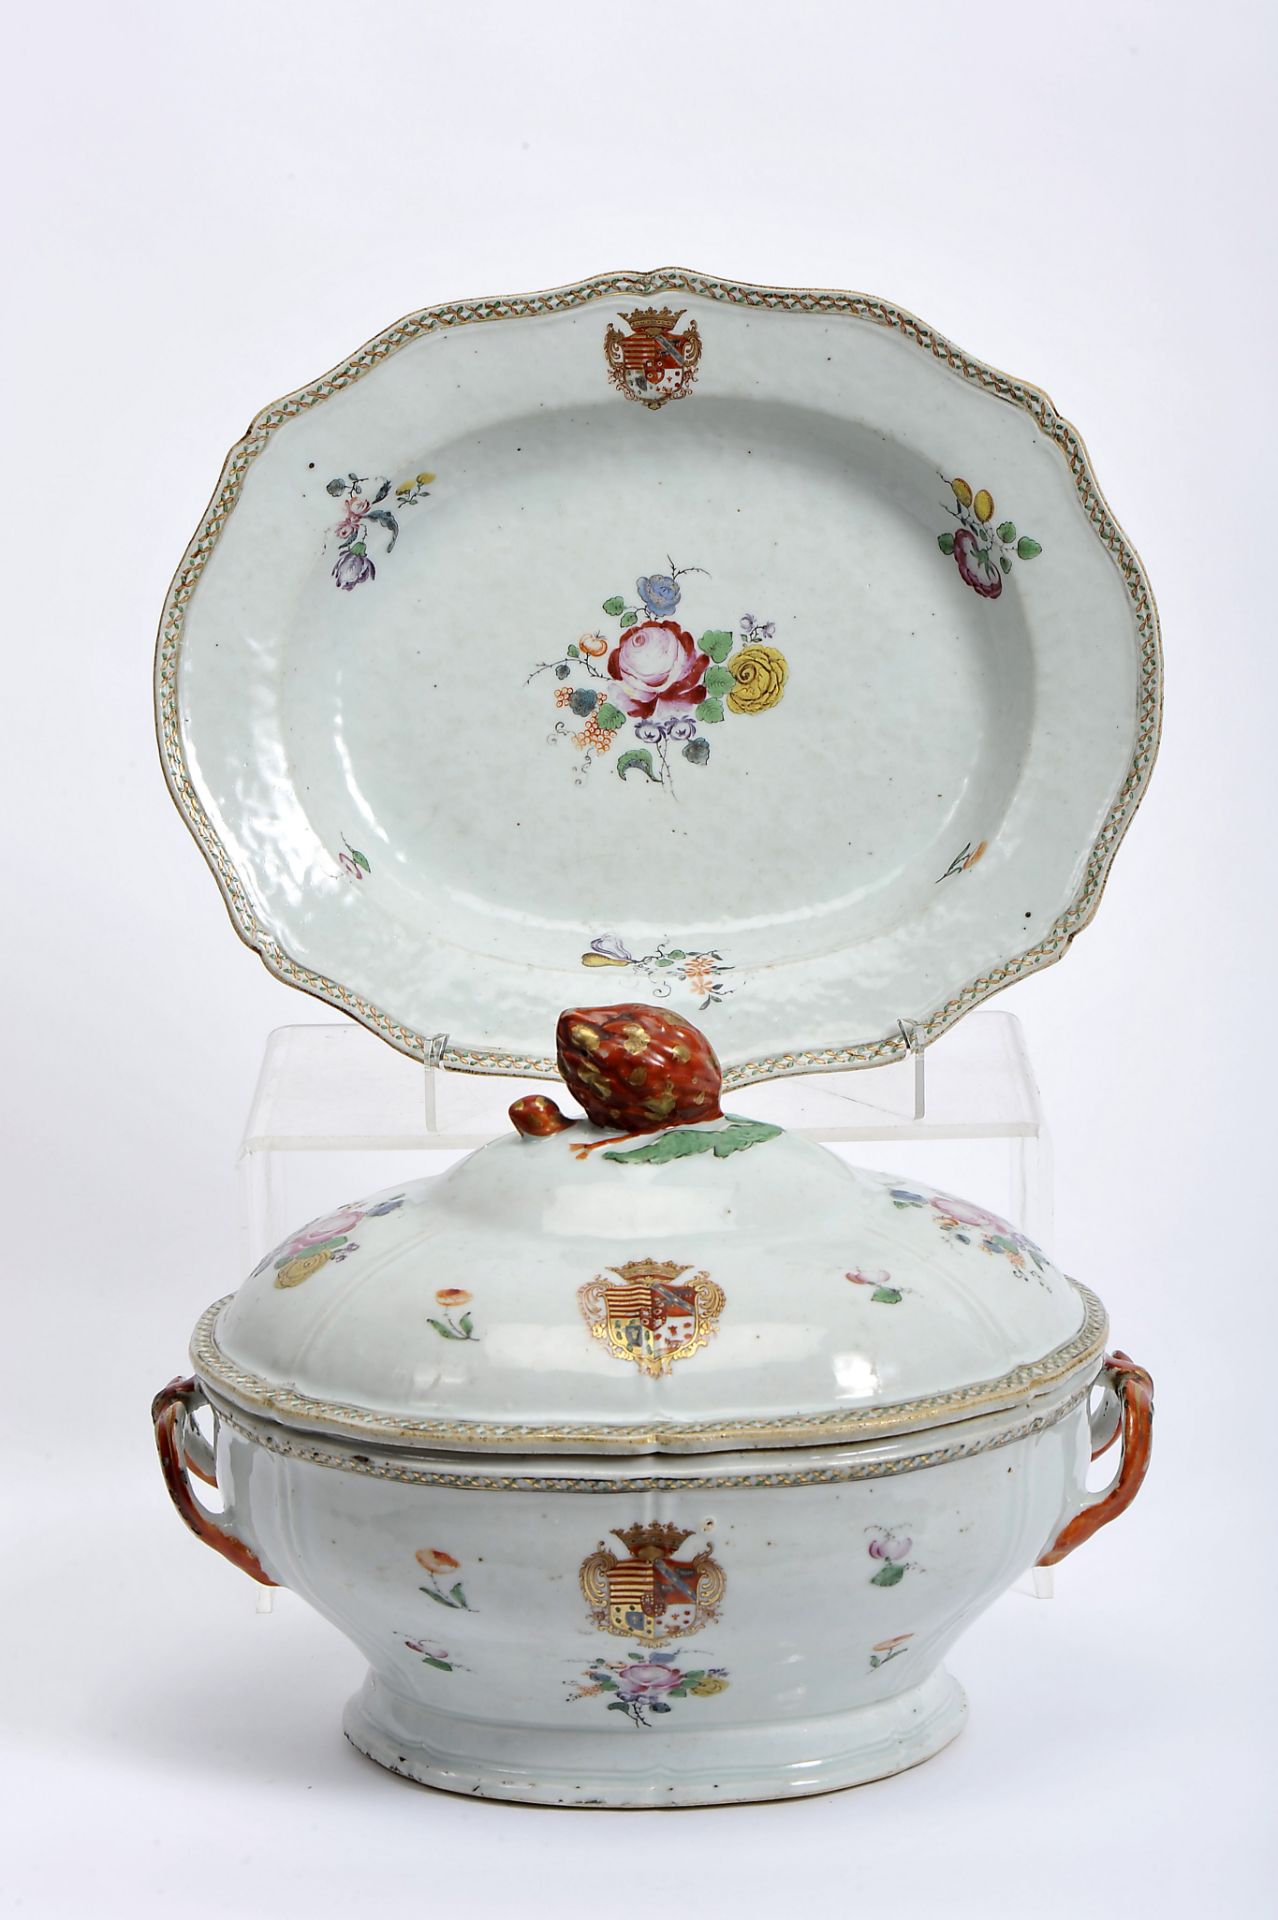 A Scalloped Tureen with Stand - Image 2 of 3